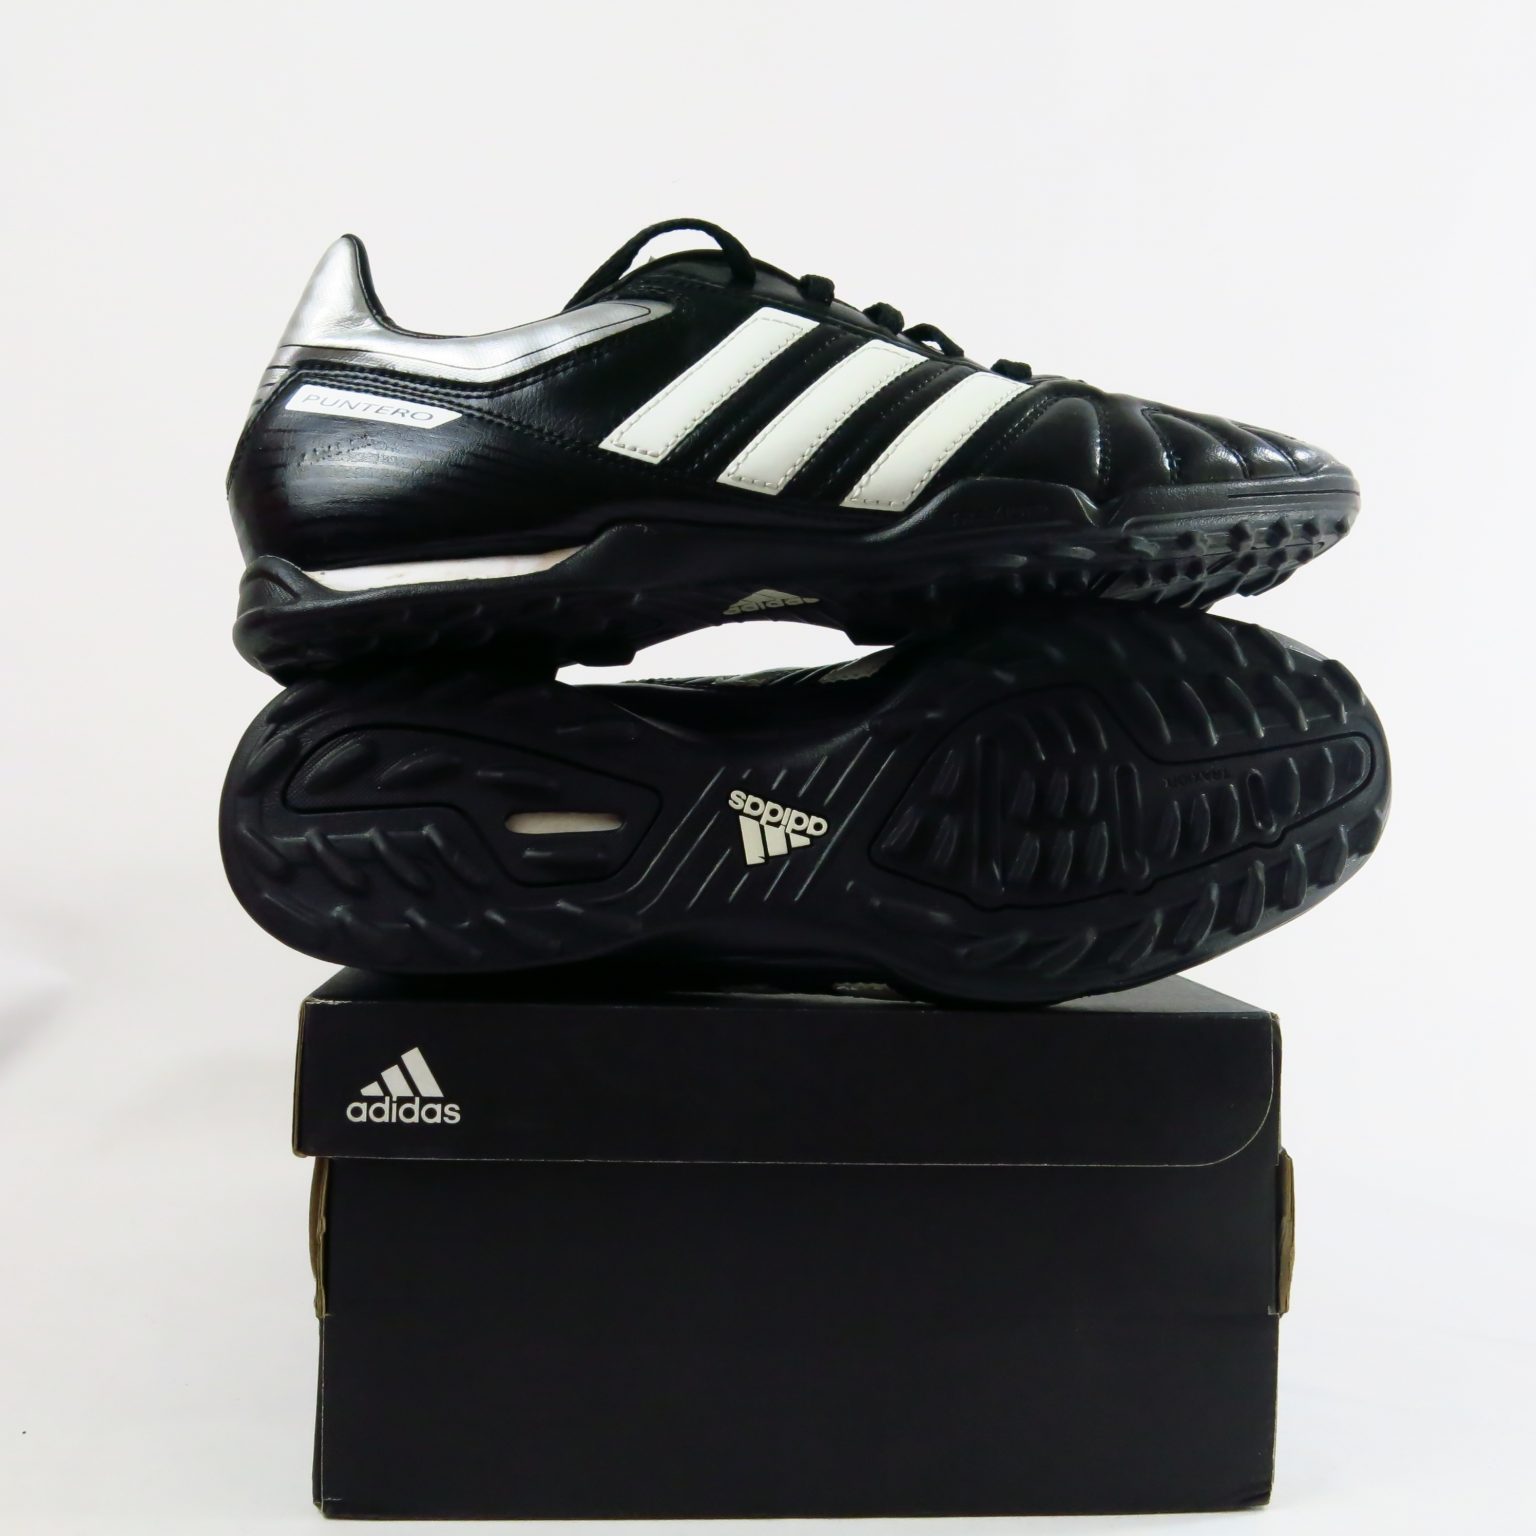 Adidas Adipure Puntero TRX TF | Old Firm Boots